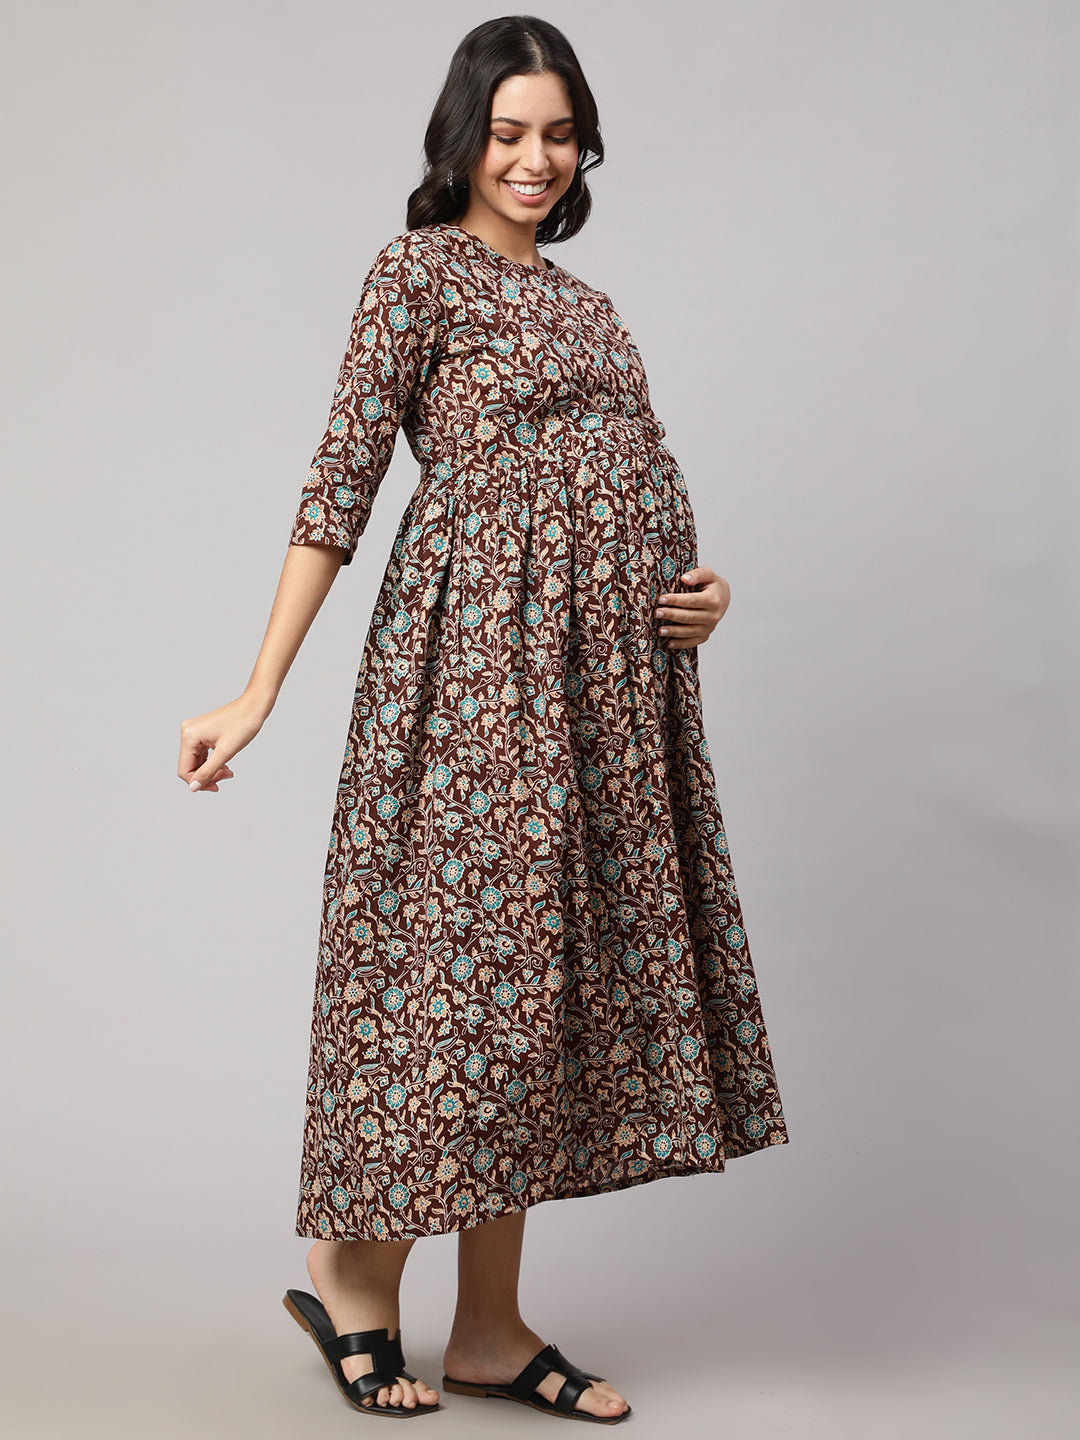 Women's Brown Floral Printed Flared Maternity Dress - Nayo Clothing